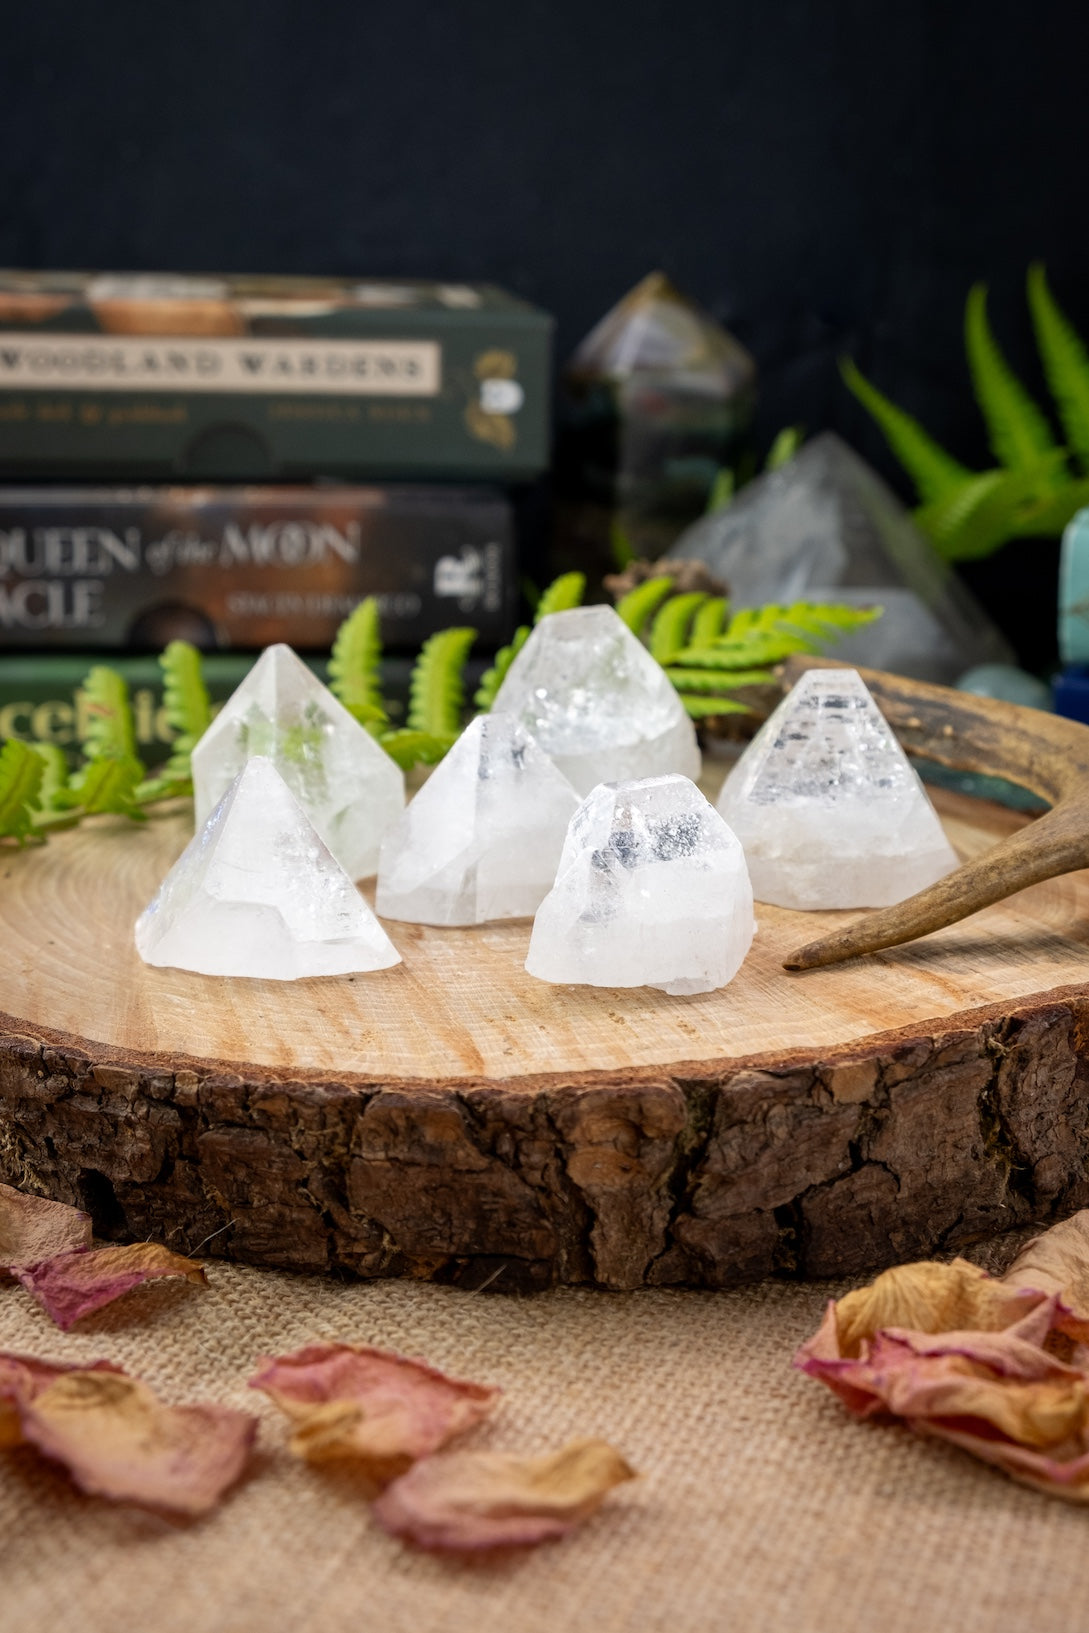 Apophyllite Crystal Point, Absorbs Negative Energy, Crystal grids.